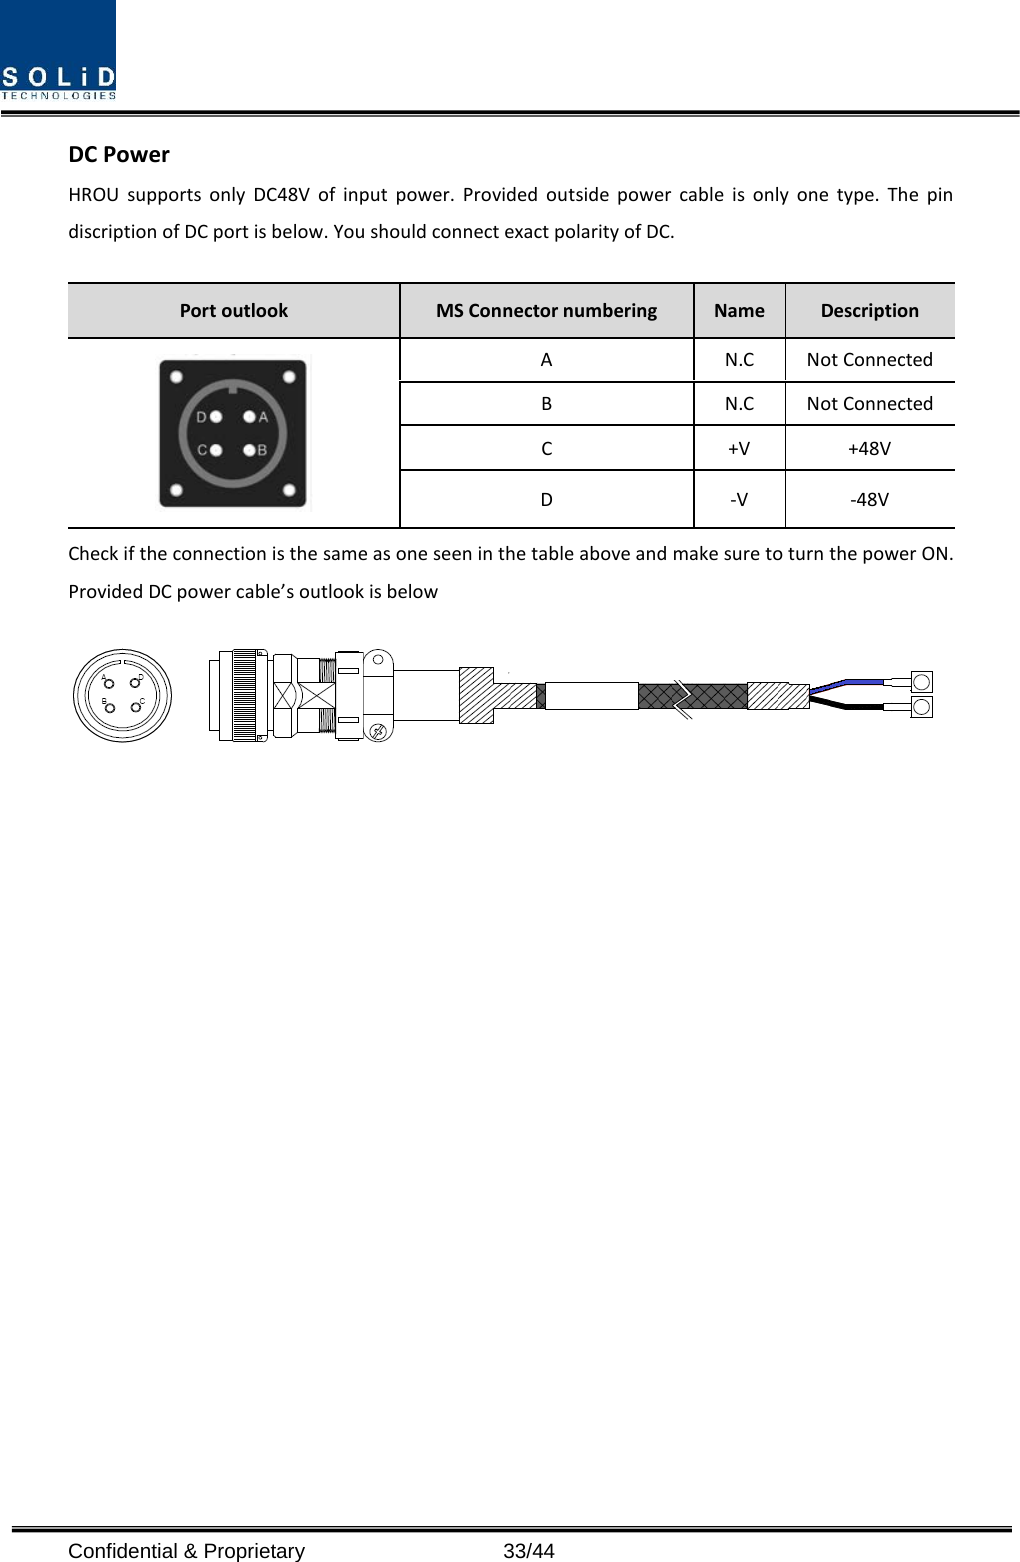  DC Power HROU supports only DC48V of input power. Provided outside power cable is only one type. The pin discription of DC port is below. You should connect exact polarity of DC.  Port outlook MS Connector numbering  Name  Description  A  N.C Not Connected B  N.C Not Connected C  +V +48V D  -V  -48V Check if the connection is the same as one seen in the table above and make sure to turn the power ON. Provided DC power cable’s outlook is below  Confidential &amp; Proprietary                   33/44 